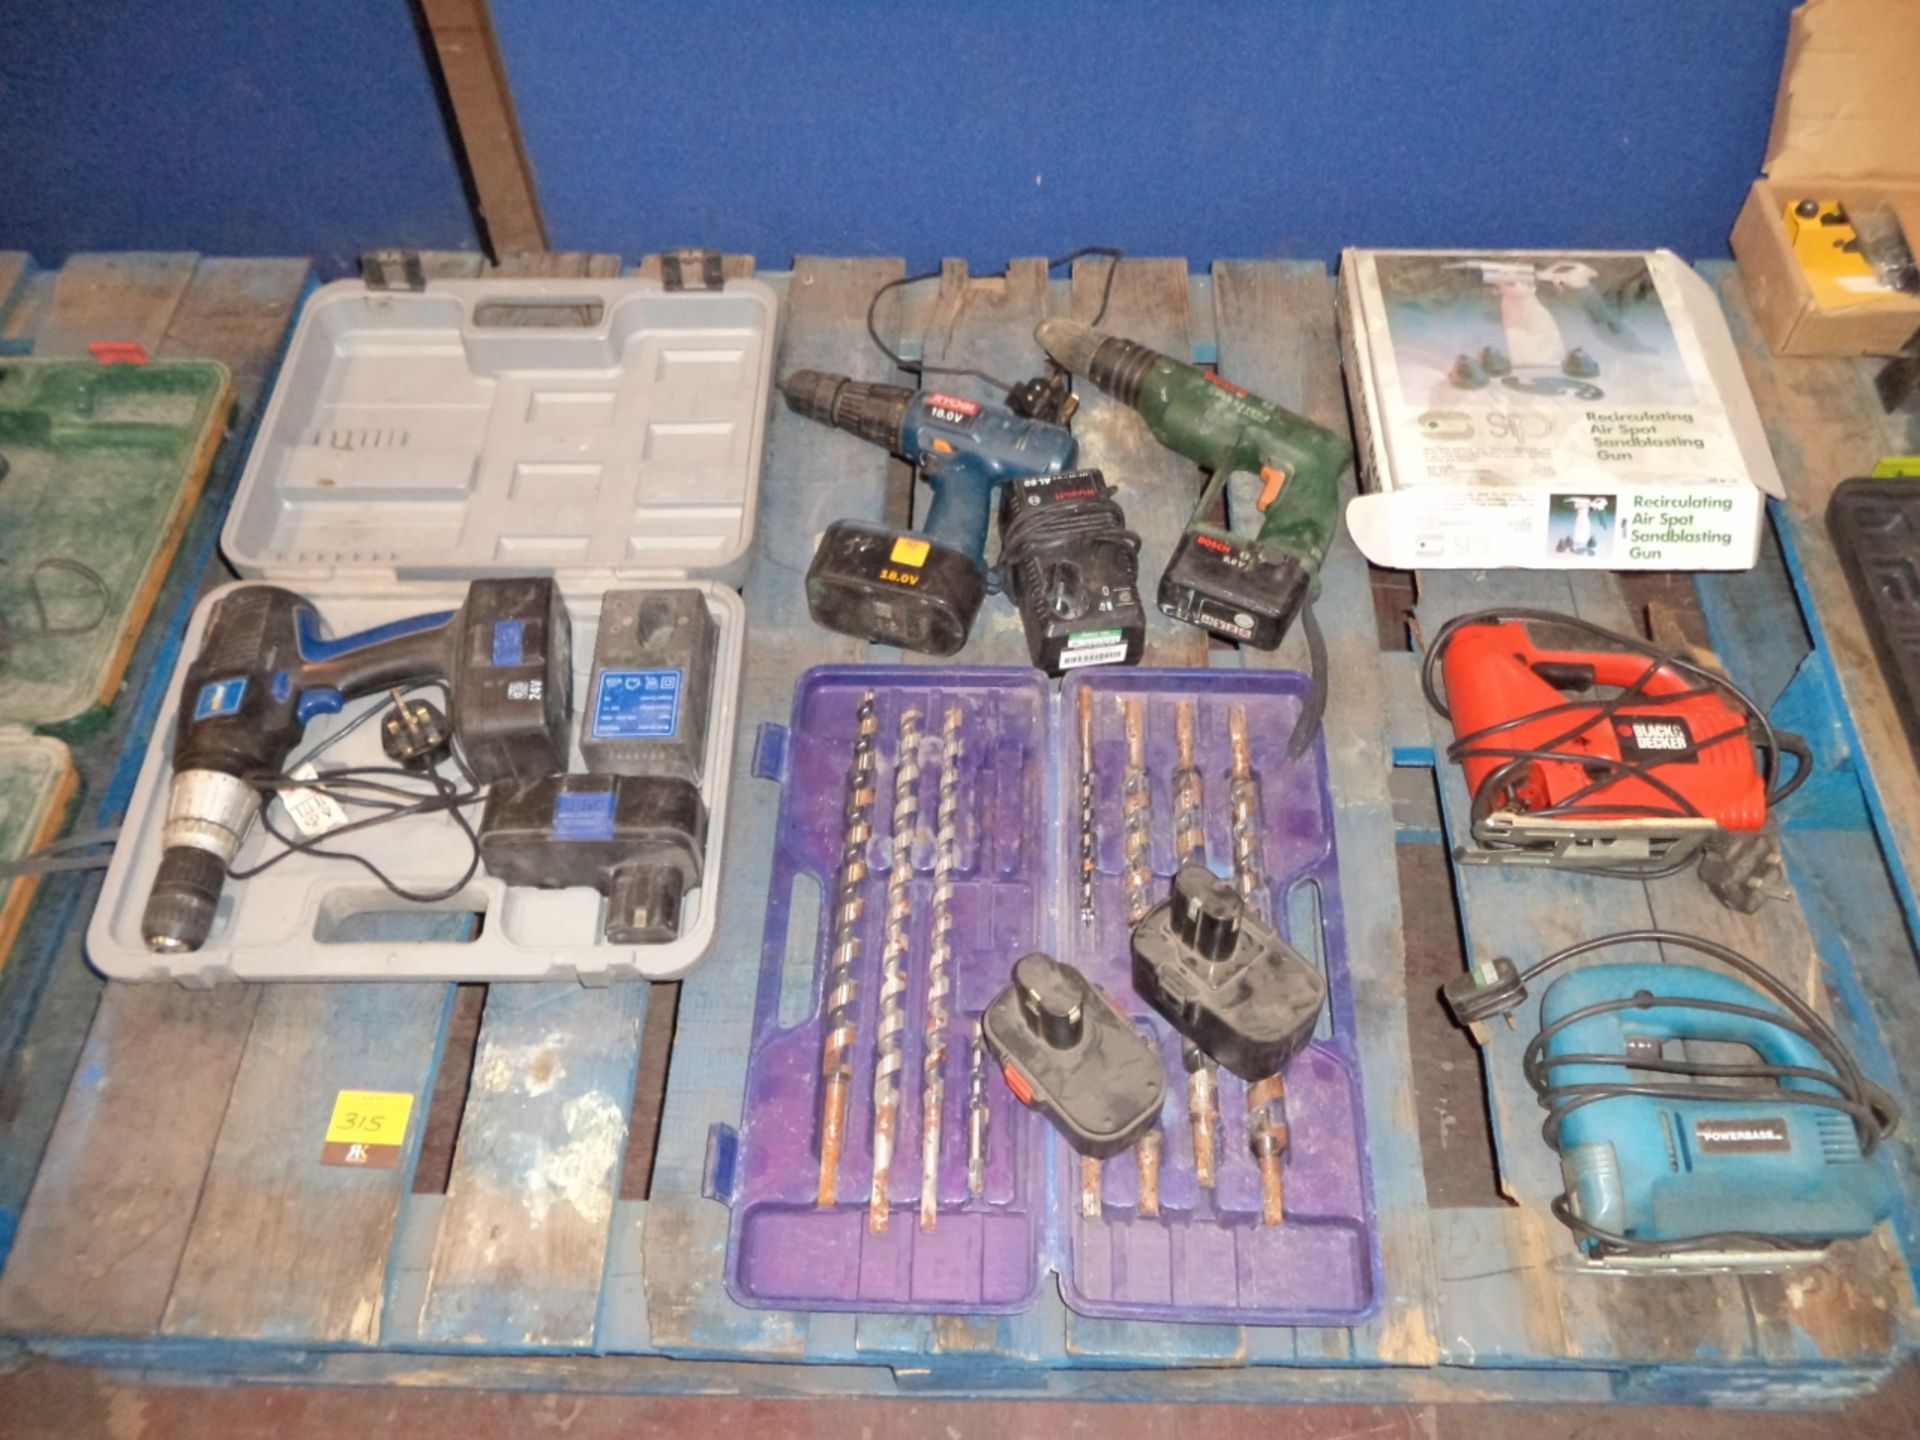 Contents of a pallet of assorted power tools and other items - see full lot description